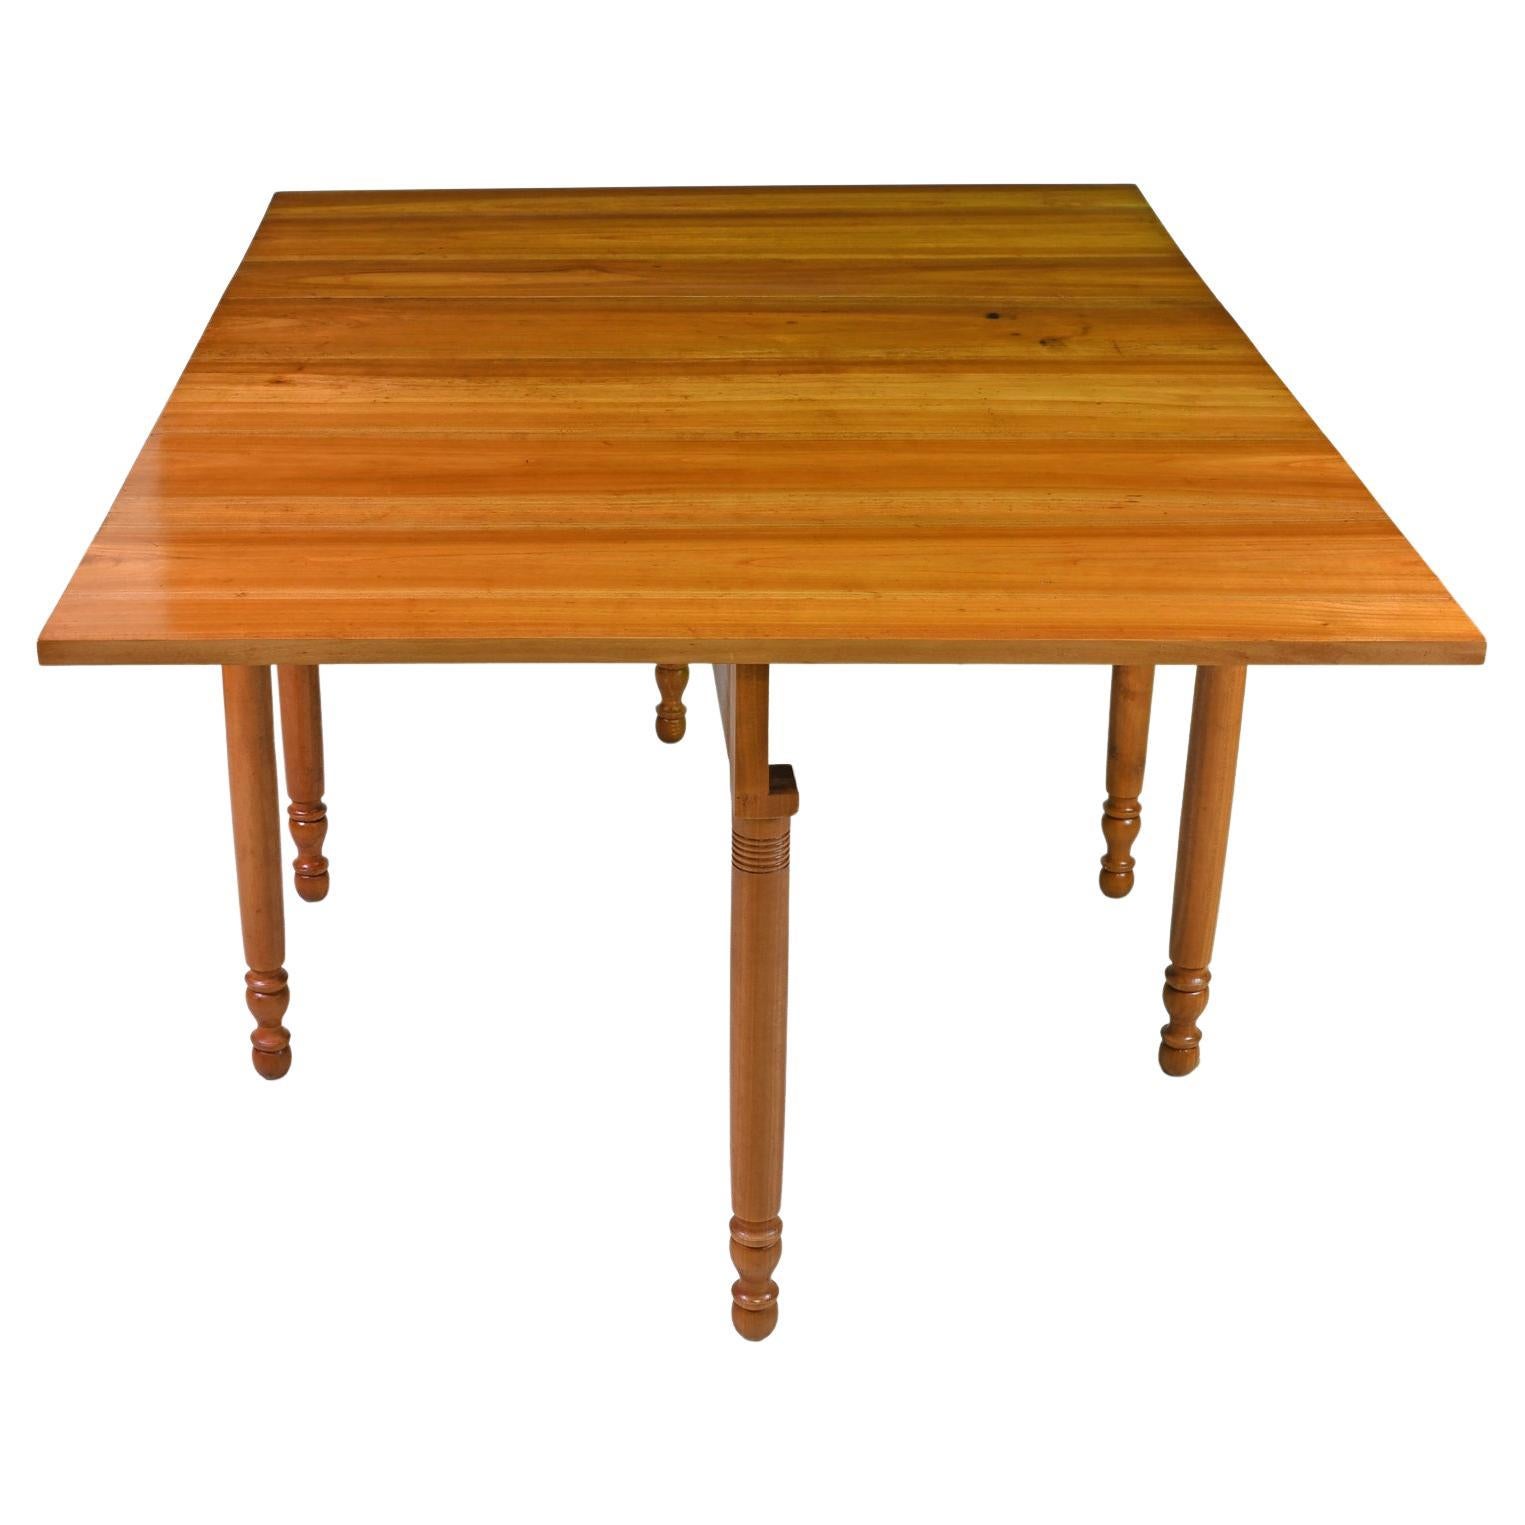 Pennsylvania Gate-Leg Drop-Leaf Sheraton Dining Table in Cherry Wood, circa 1830 In Good Condition For Sale In Miami, FL